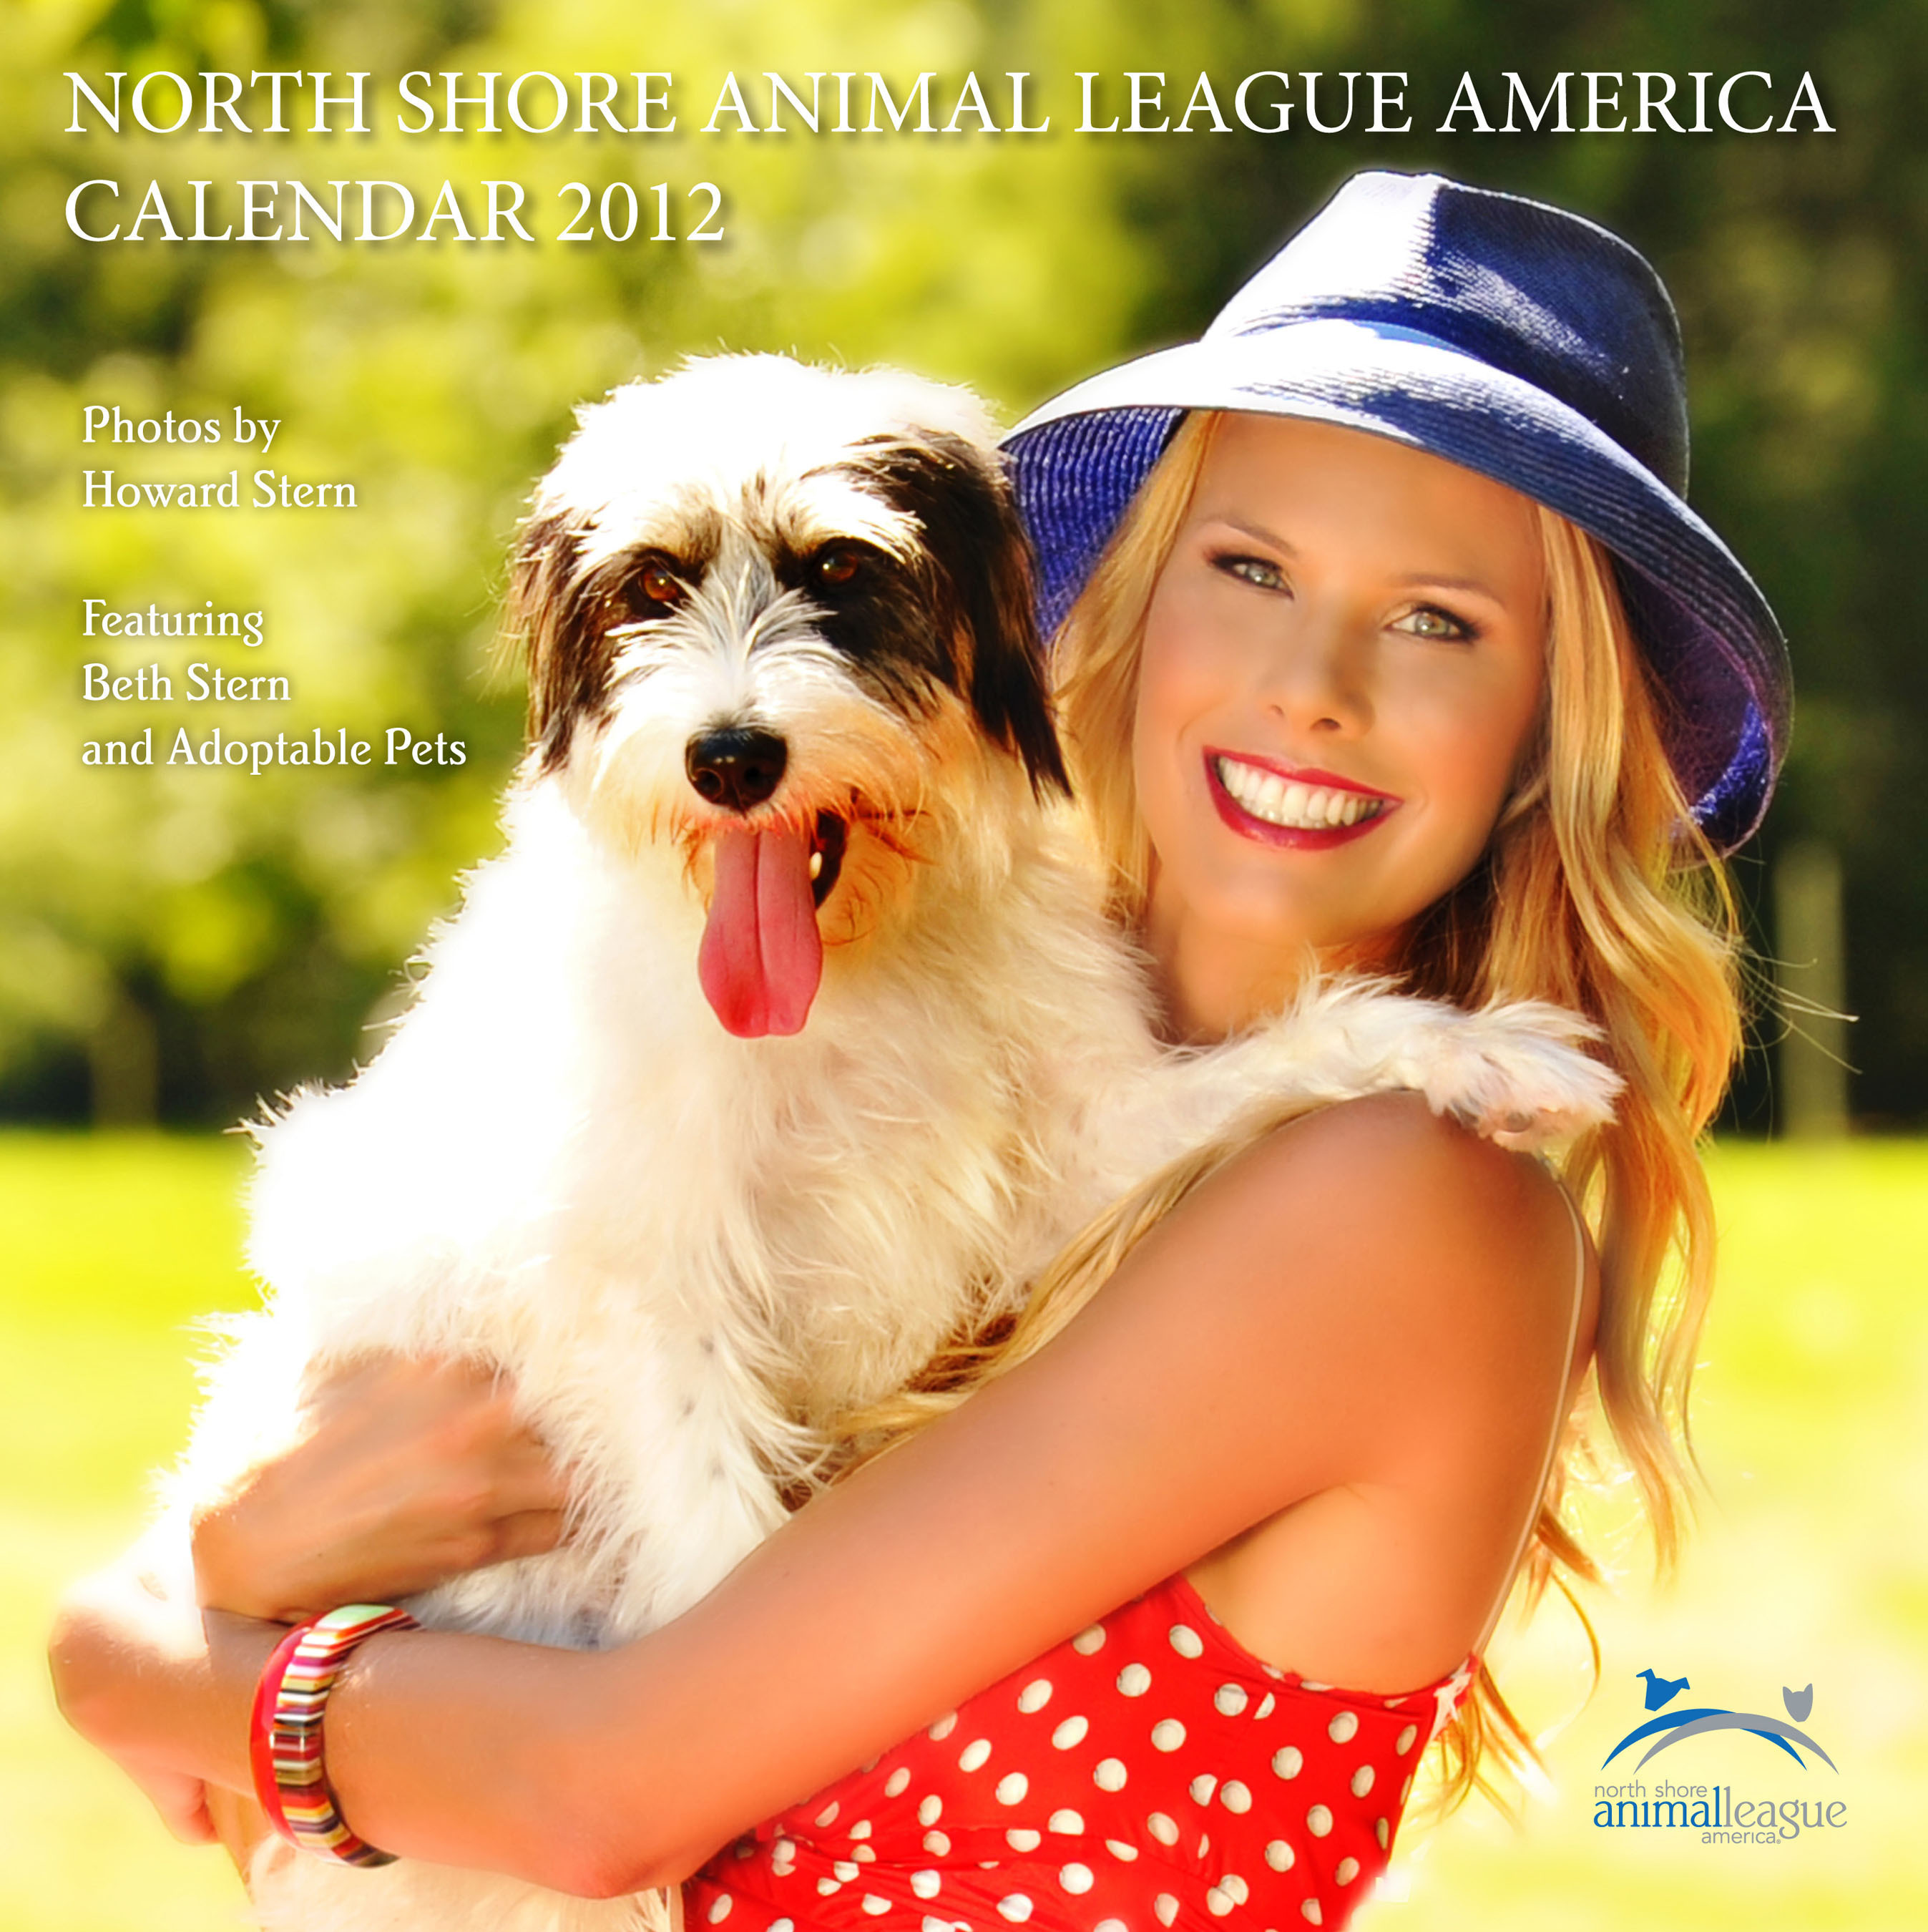 Animal Advocates And Adopters Beth And Howard Stern Resolve To Help Save Animals Lives In 2012 With Commemorative Calendar In Support Of North Shore Animal League America S Mission